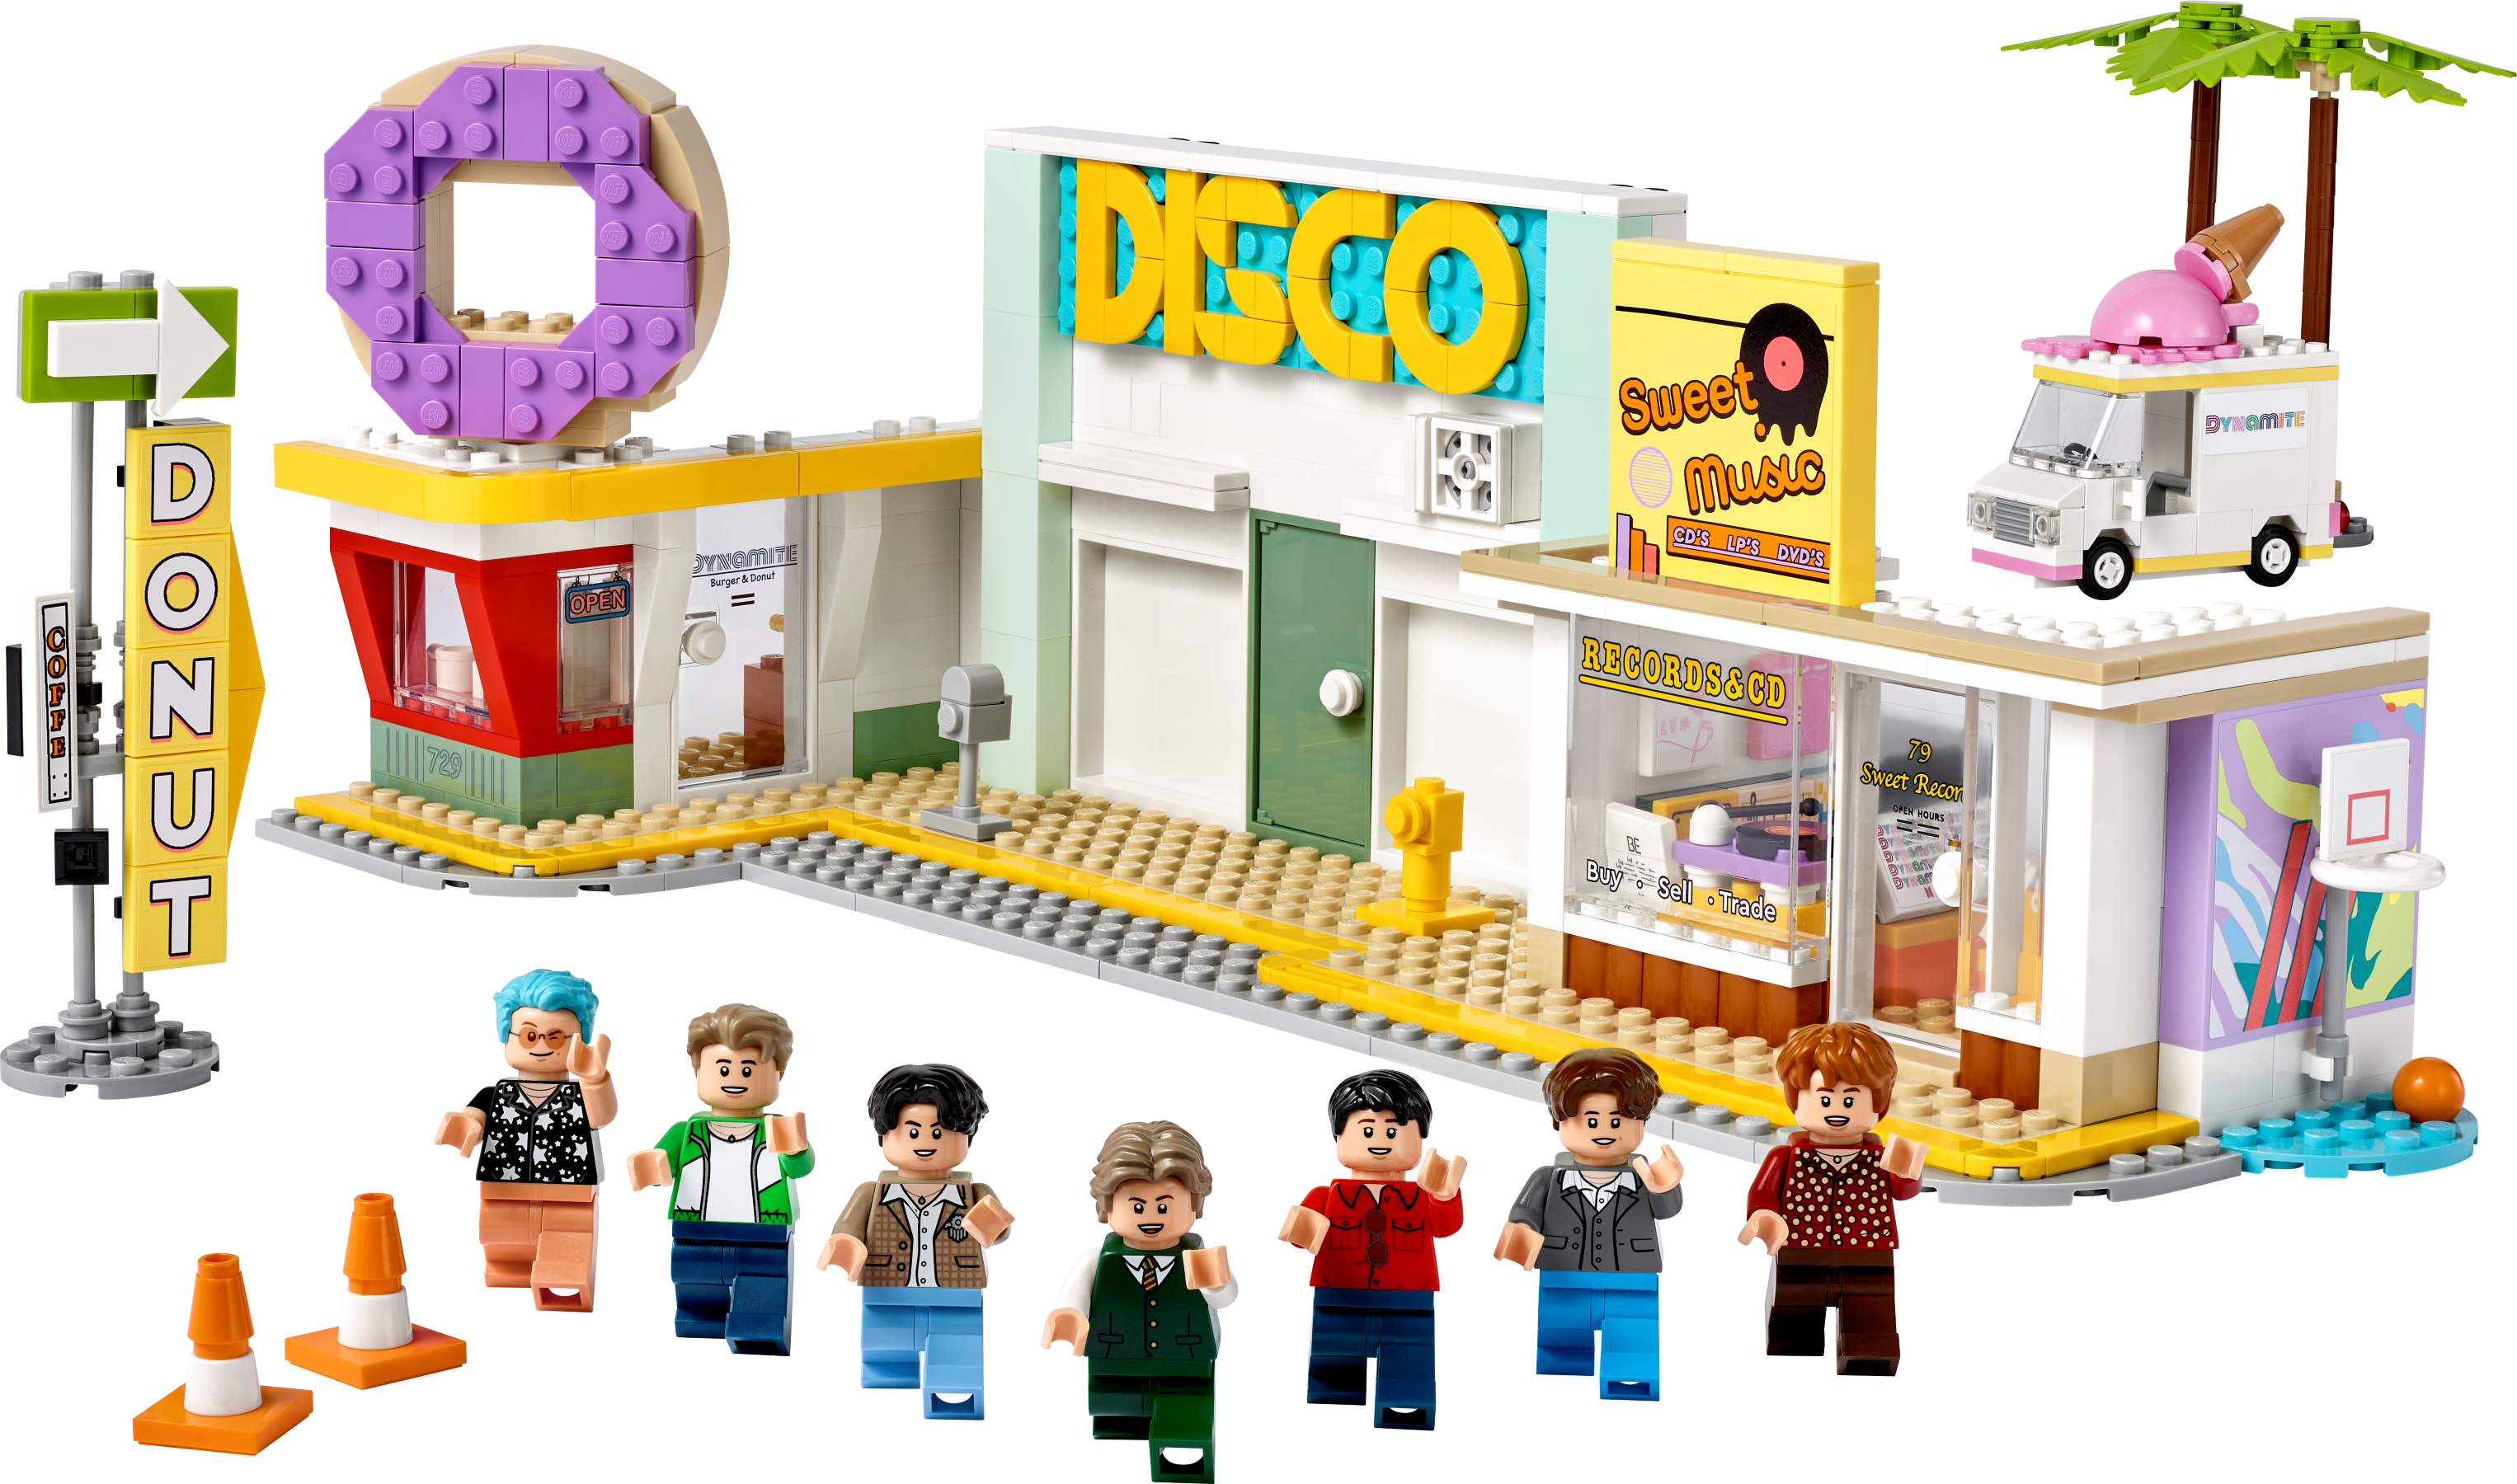 BTS Dynamite 21339 | Ideas | Buy online at the Official LEGO® Shop CA